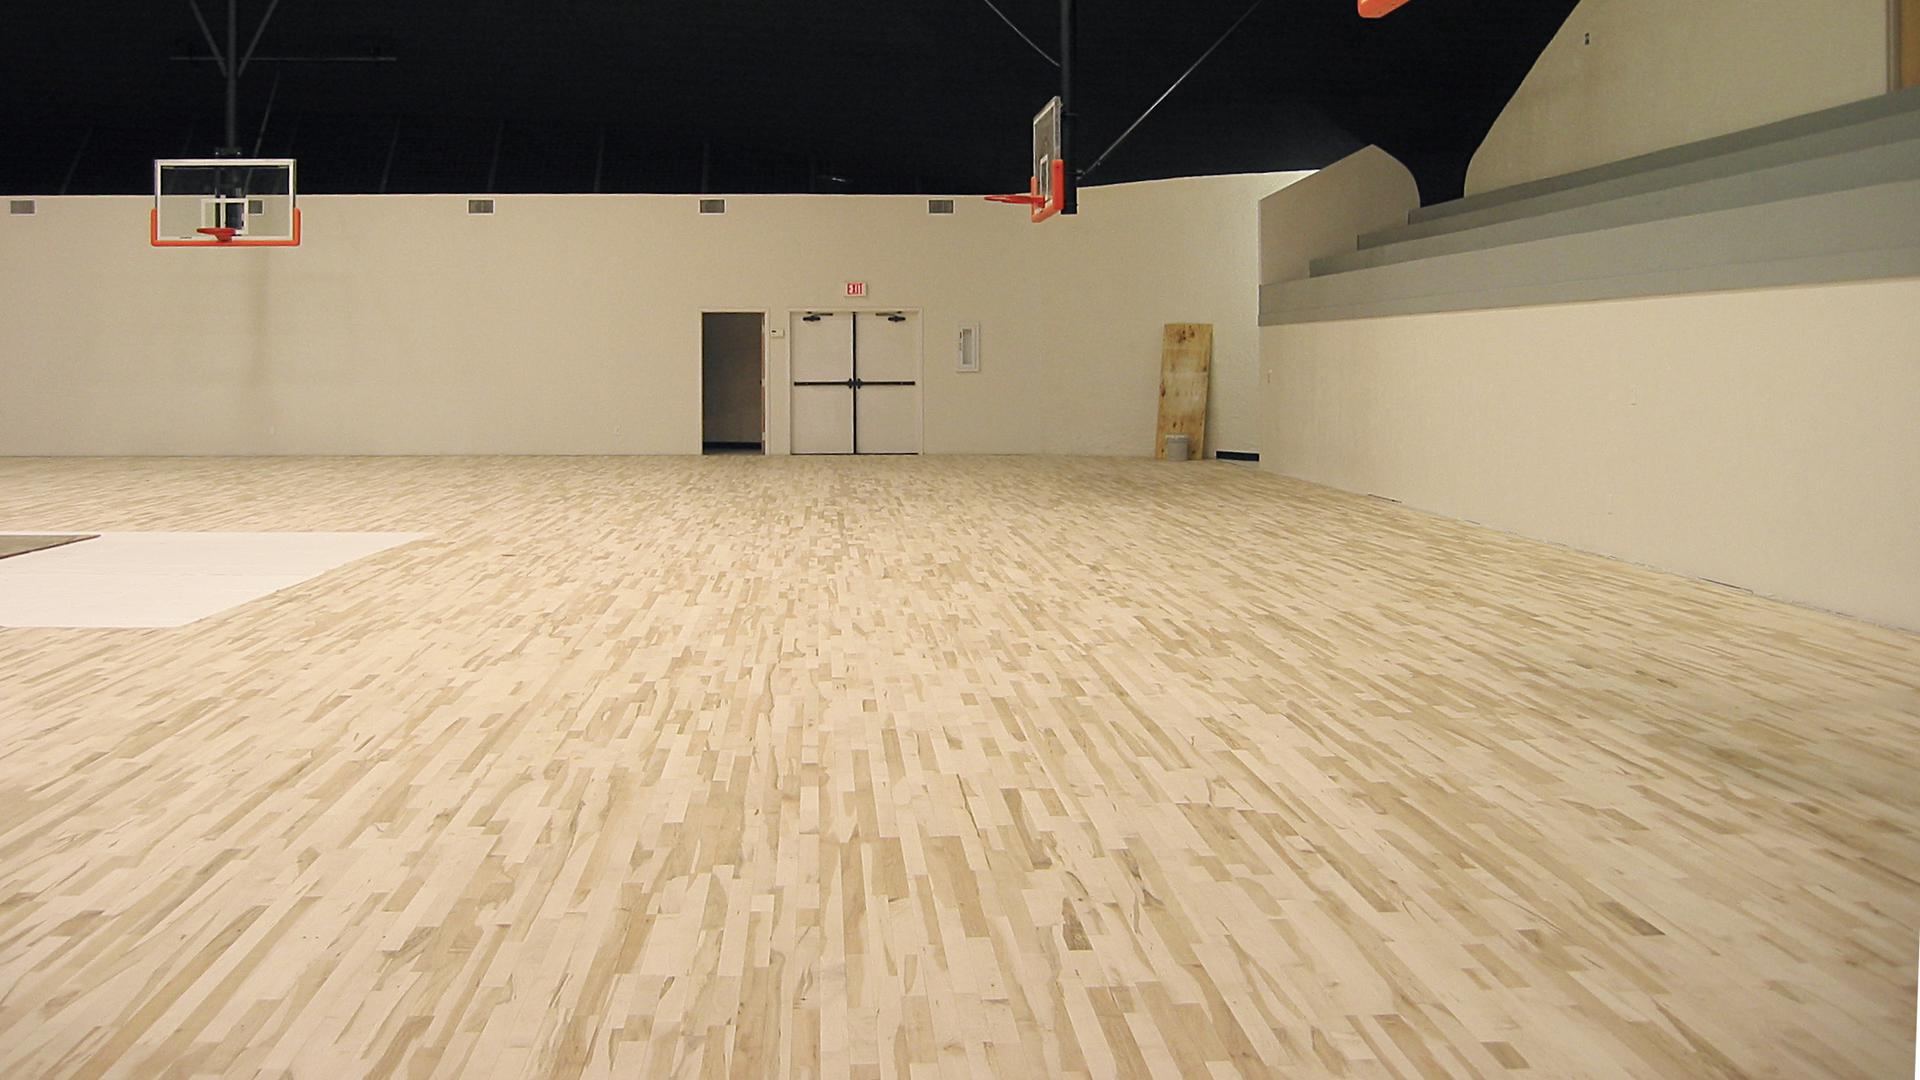 The wood basketball court floor is install, but still needs to be stained and sealed.